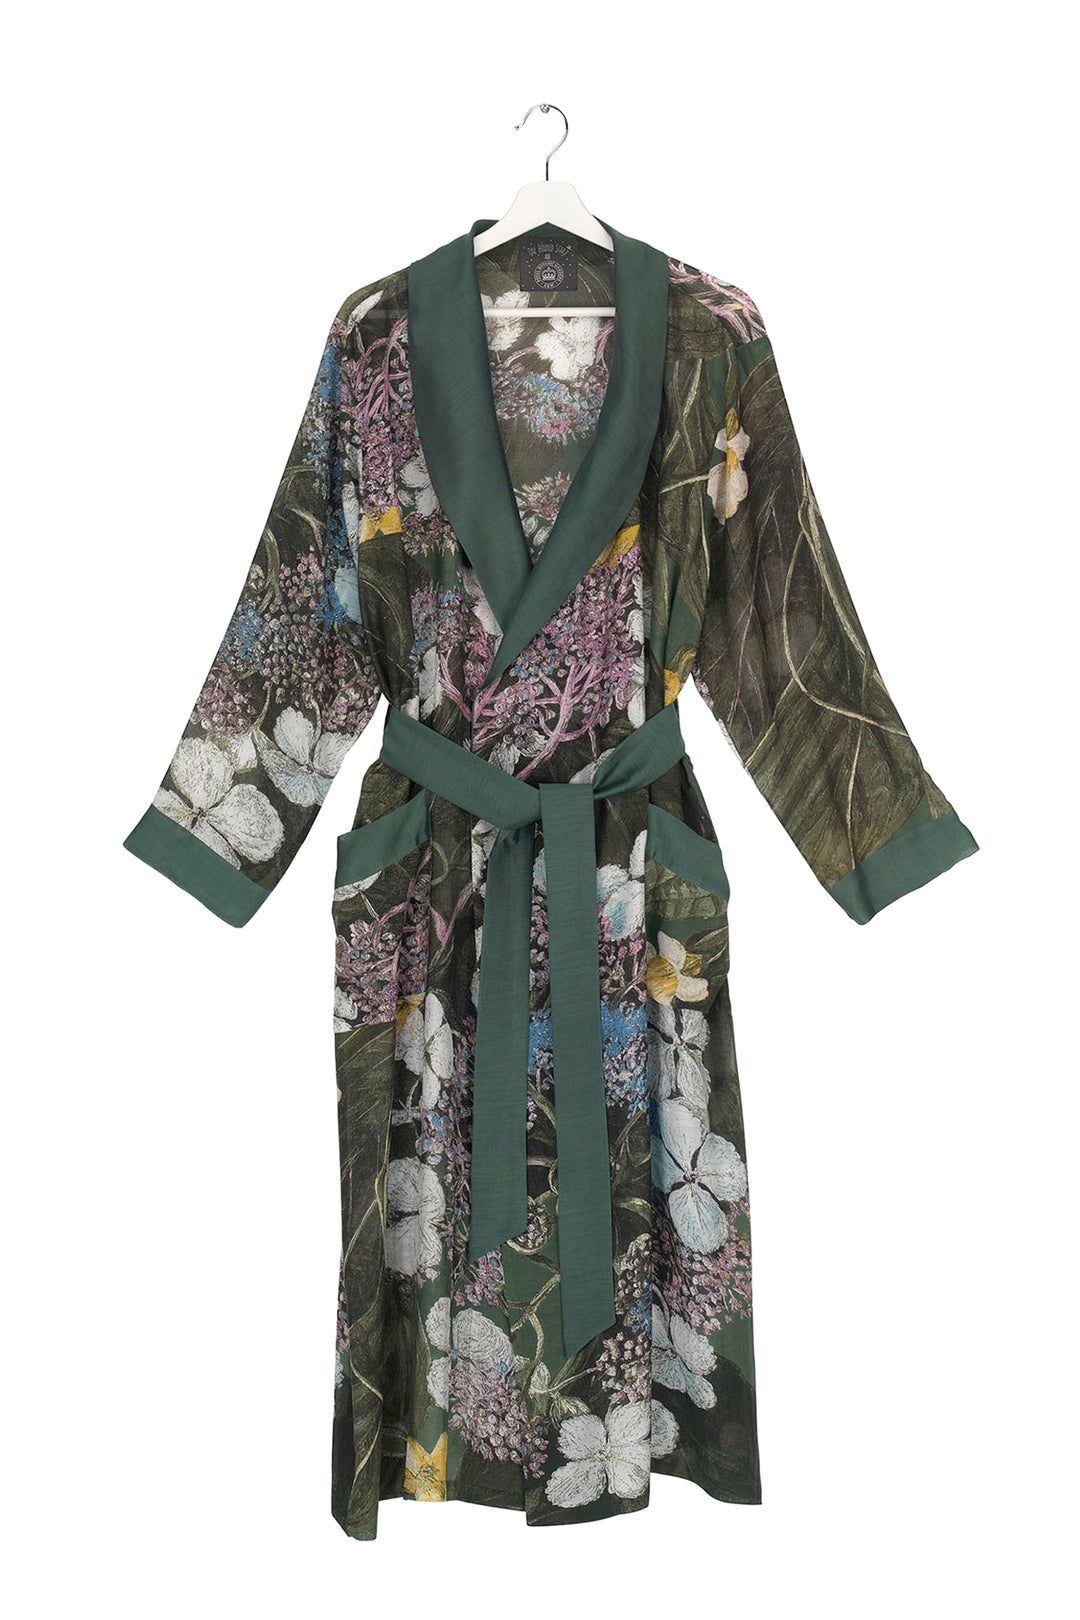 Marianne North Hydrangea Forest Gown- This gown is perfect as a luxurious house coat or for layering as a chic accessory to your favourite outfit.